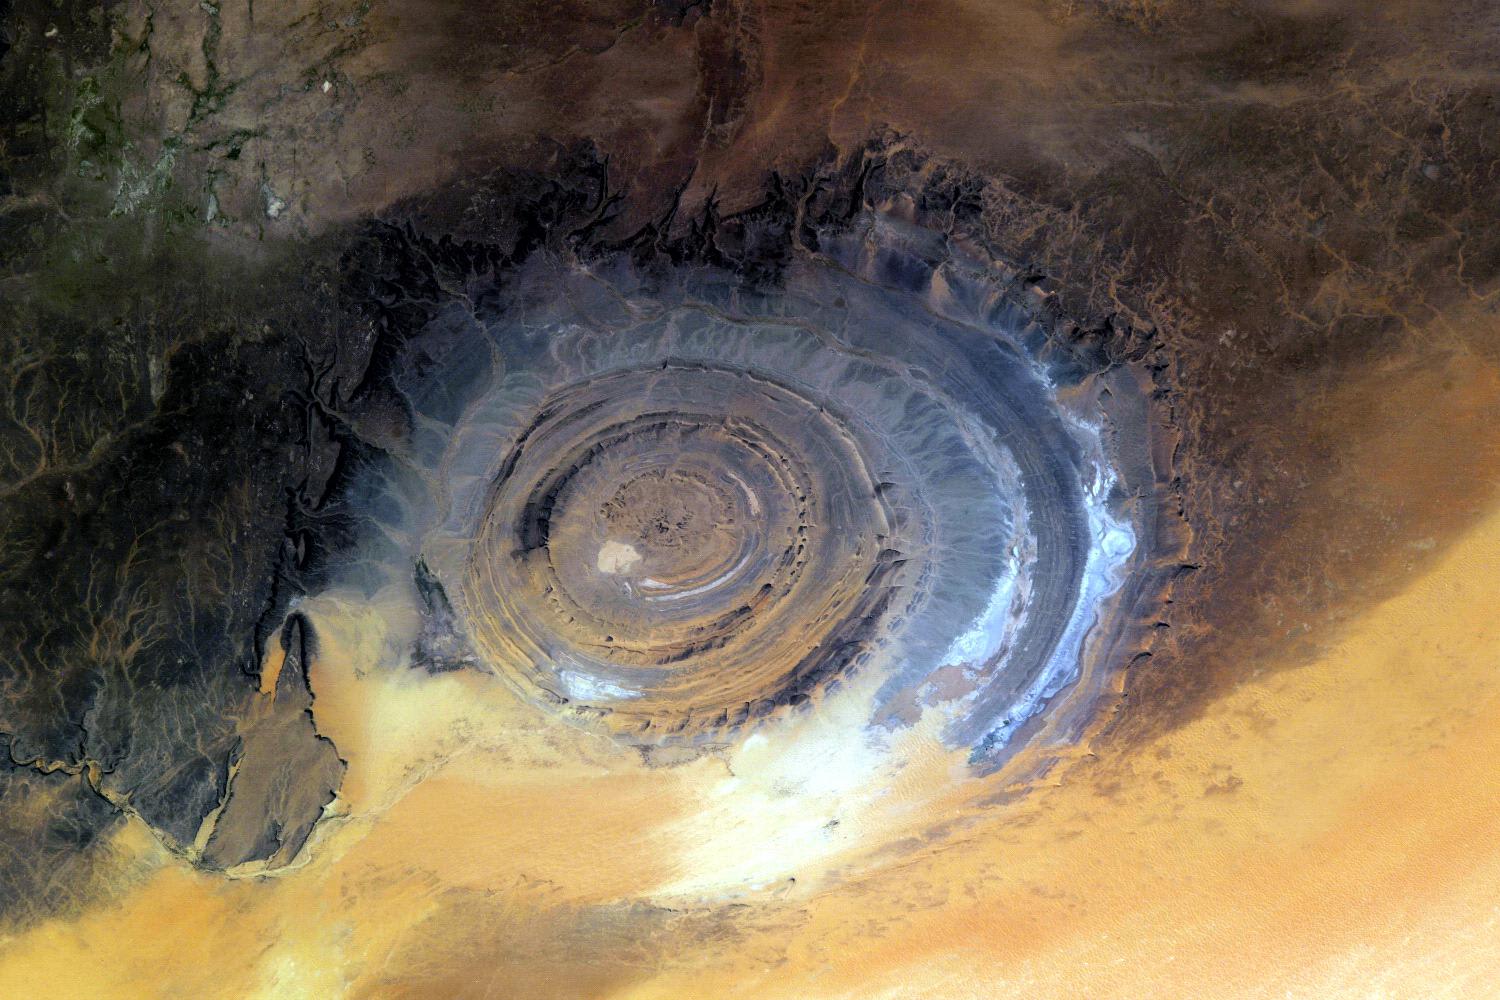 Although this unique object called The Eye of Sahara or Richat Structure has been explained as purely natural creation, its eerie looks and massive dimensions (40km/25mi in diameter) spawned a few "strange" theories. According to one, it's Atlantis.